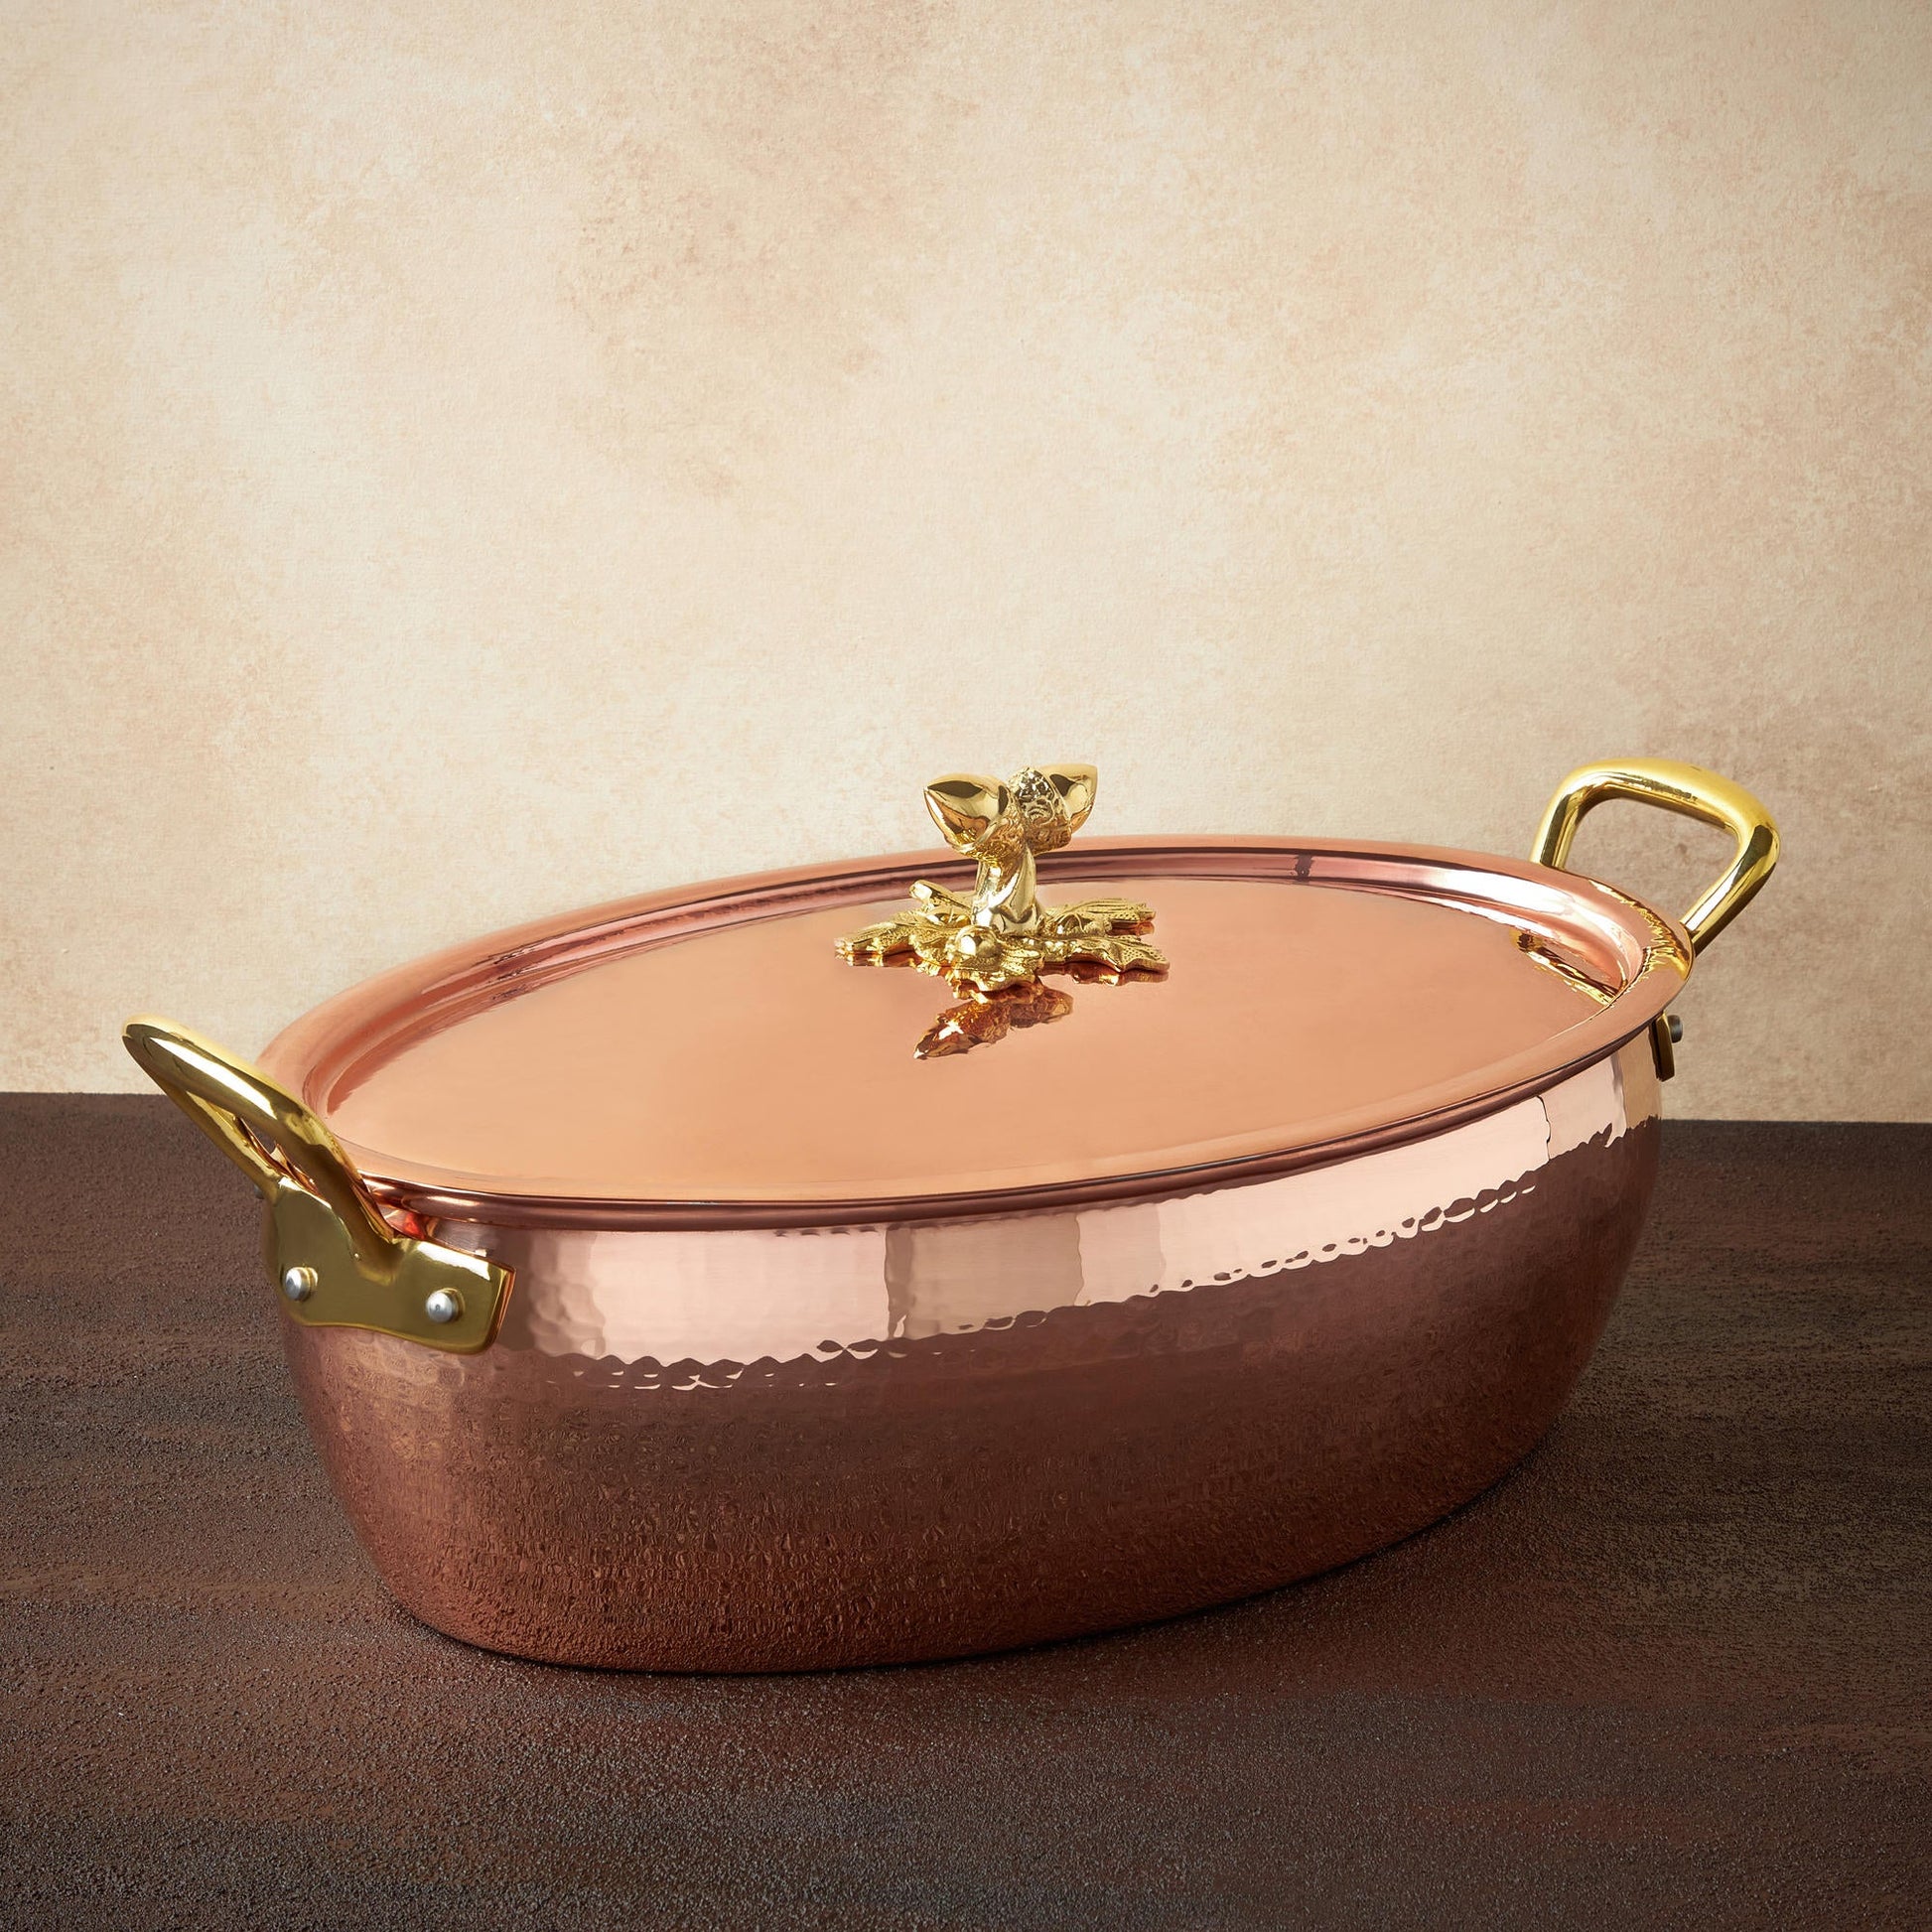 Hammered copper 8 Qt Oval Casserole lined with high purity tin applied by hand over fire and bronze handles, from Ruffoni Historia collection